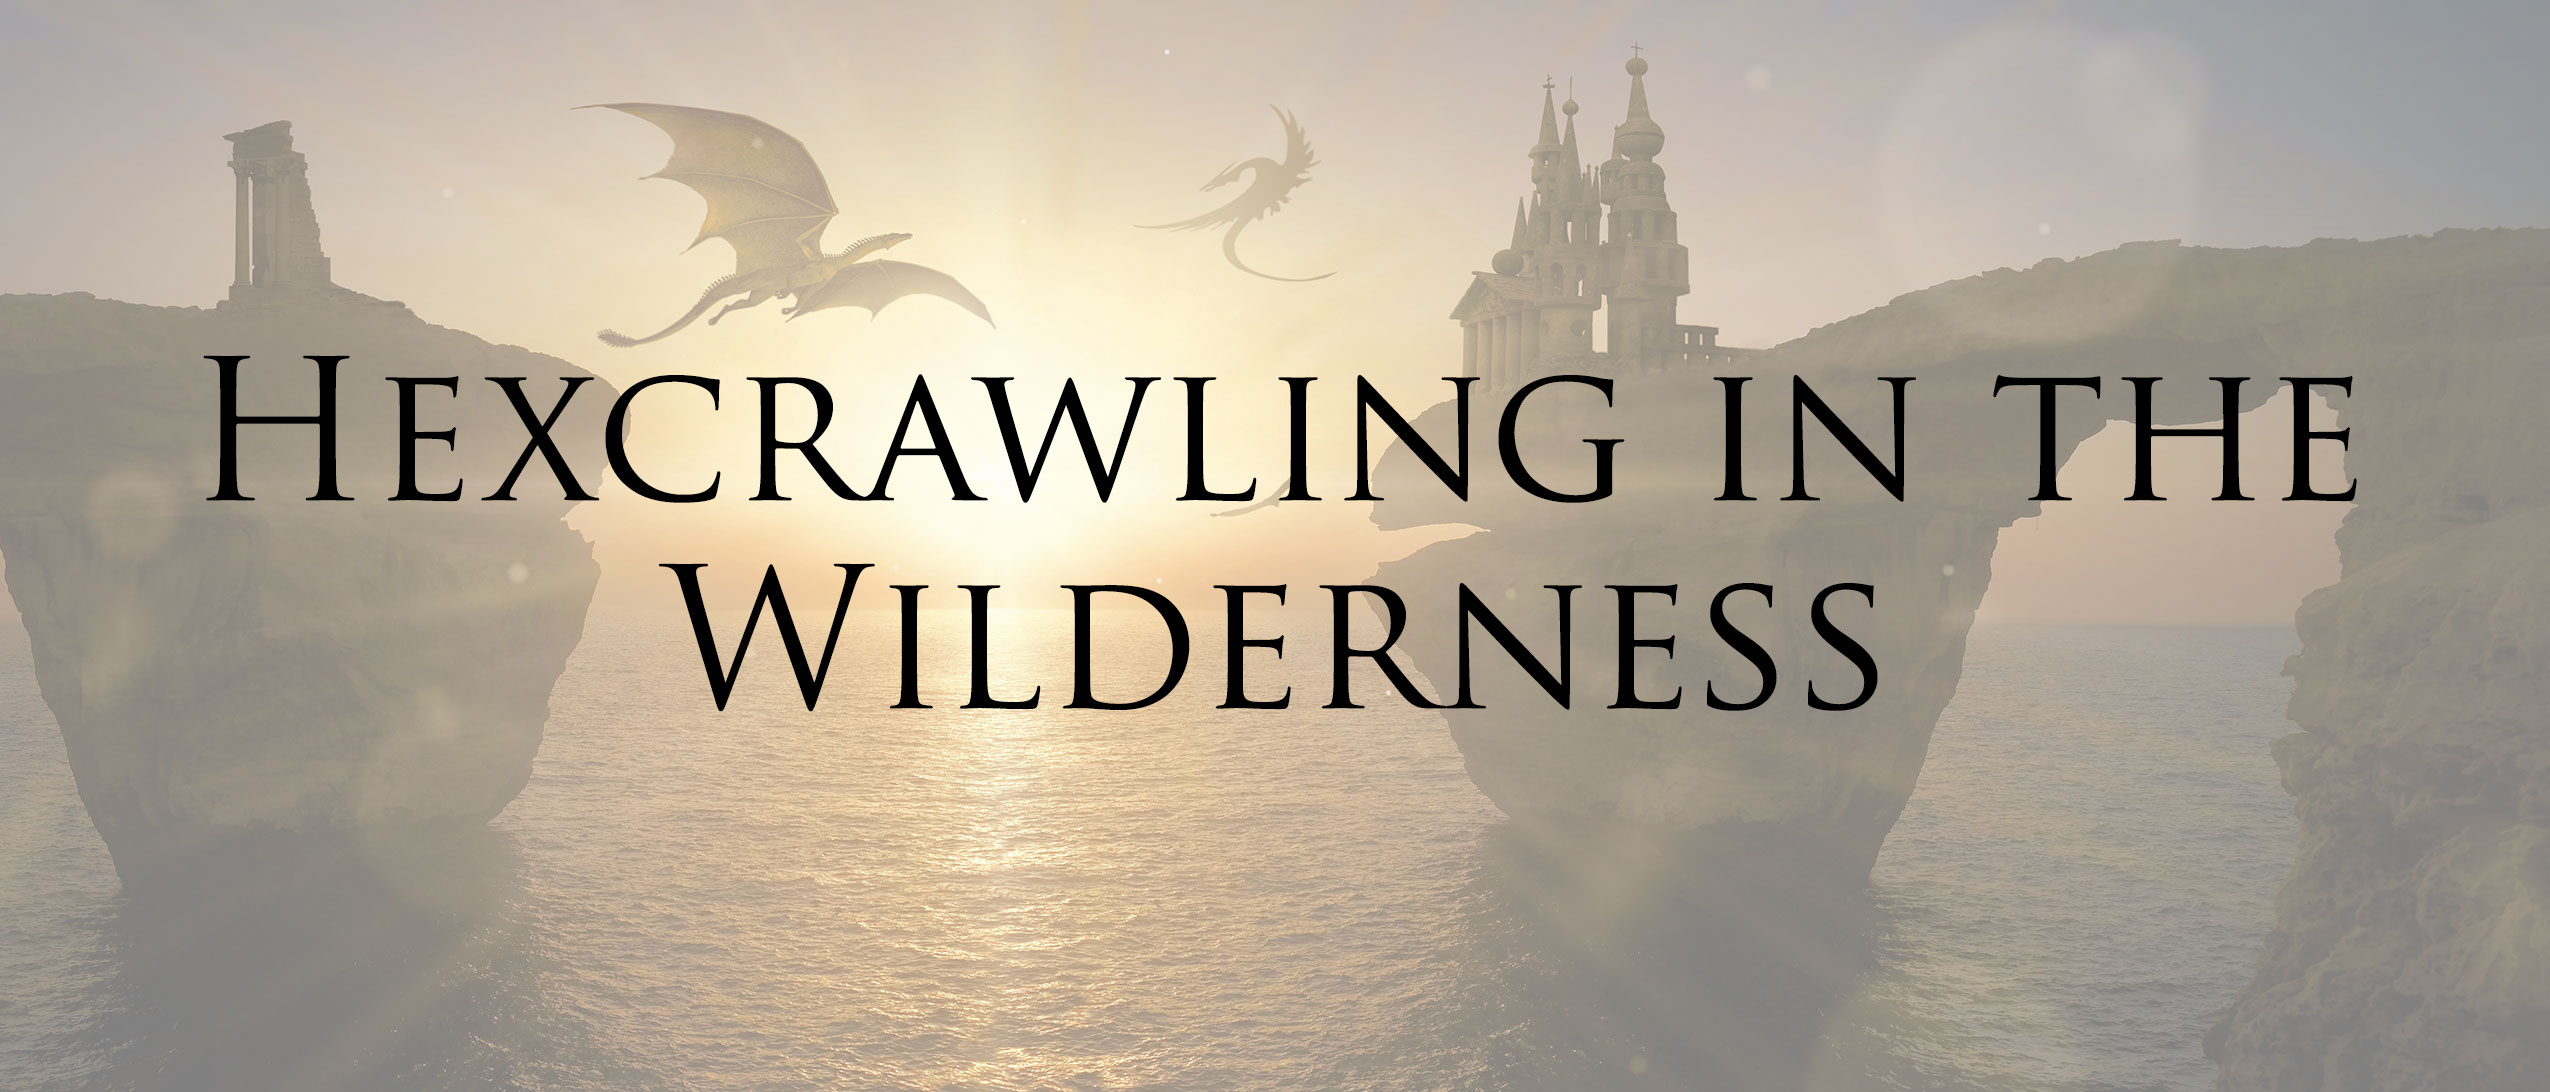 Hexcrawling in the Wilderness - A Business Card Game